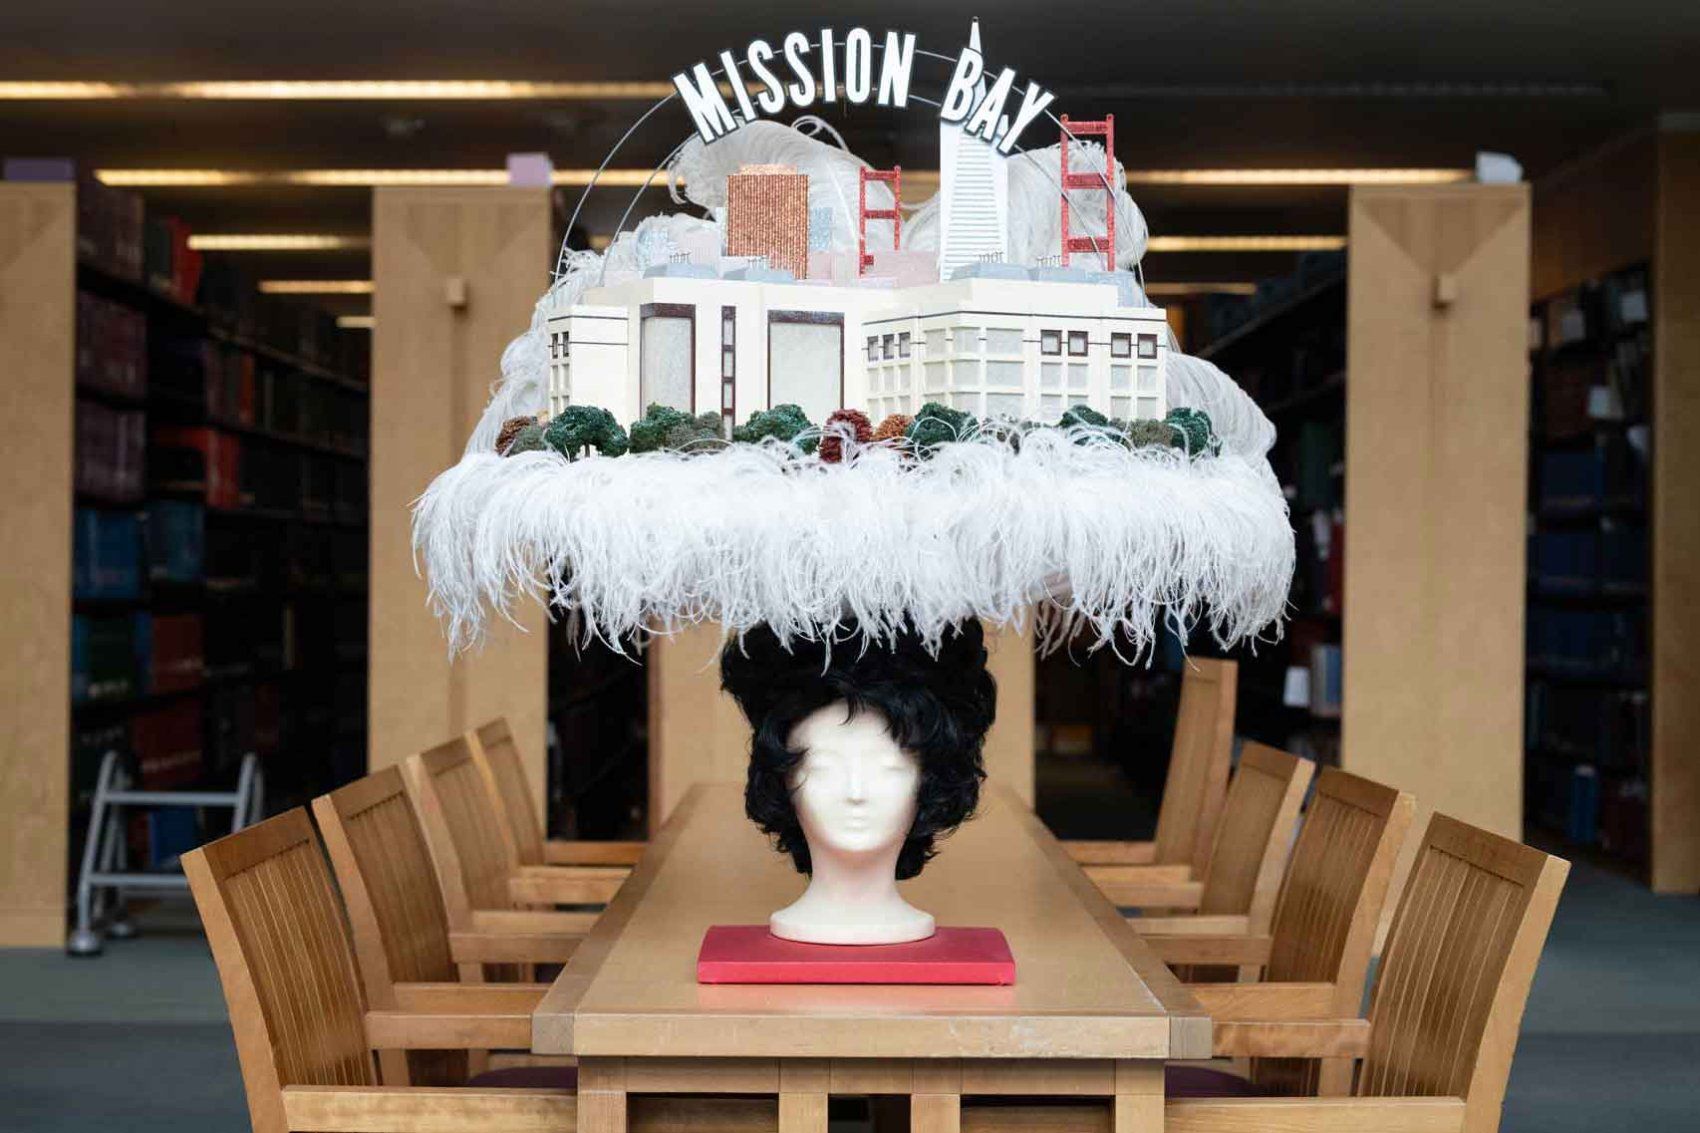 A large stage hat that has miniature models of Mission Bay landmarks.